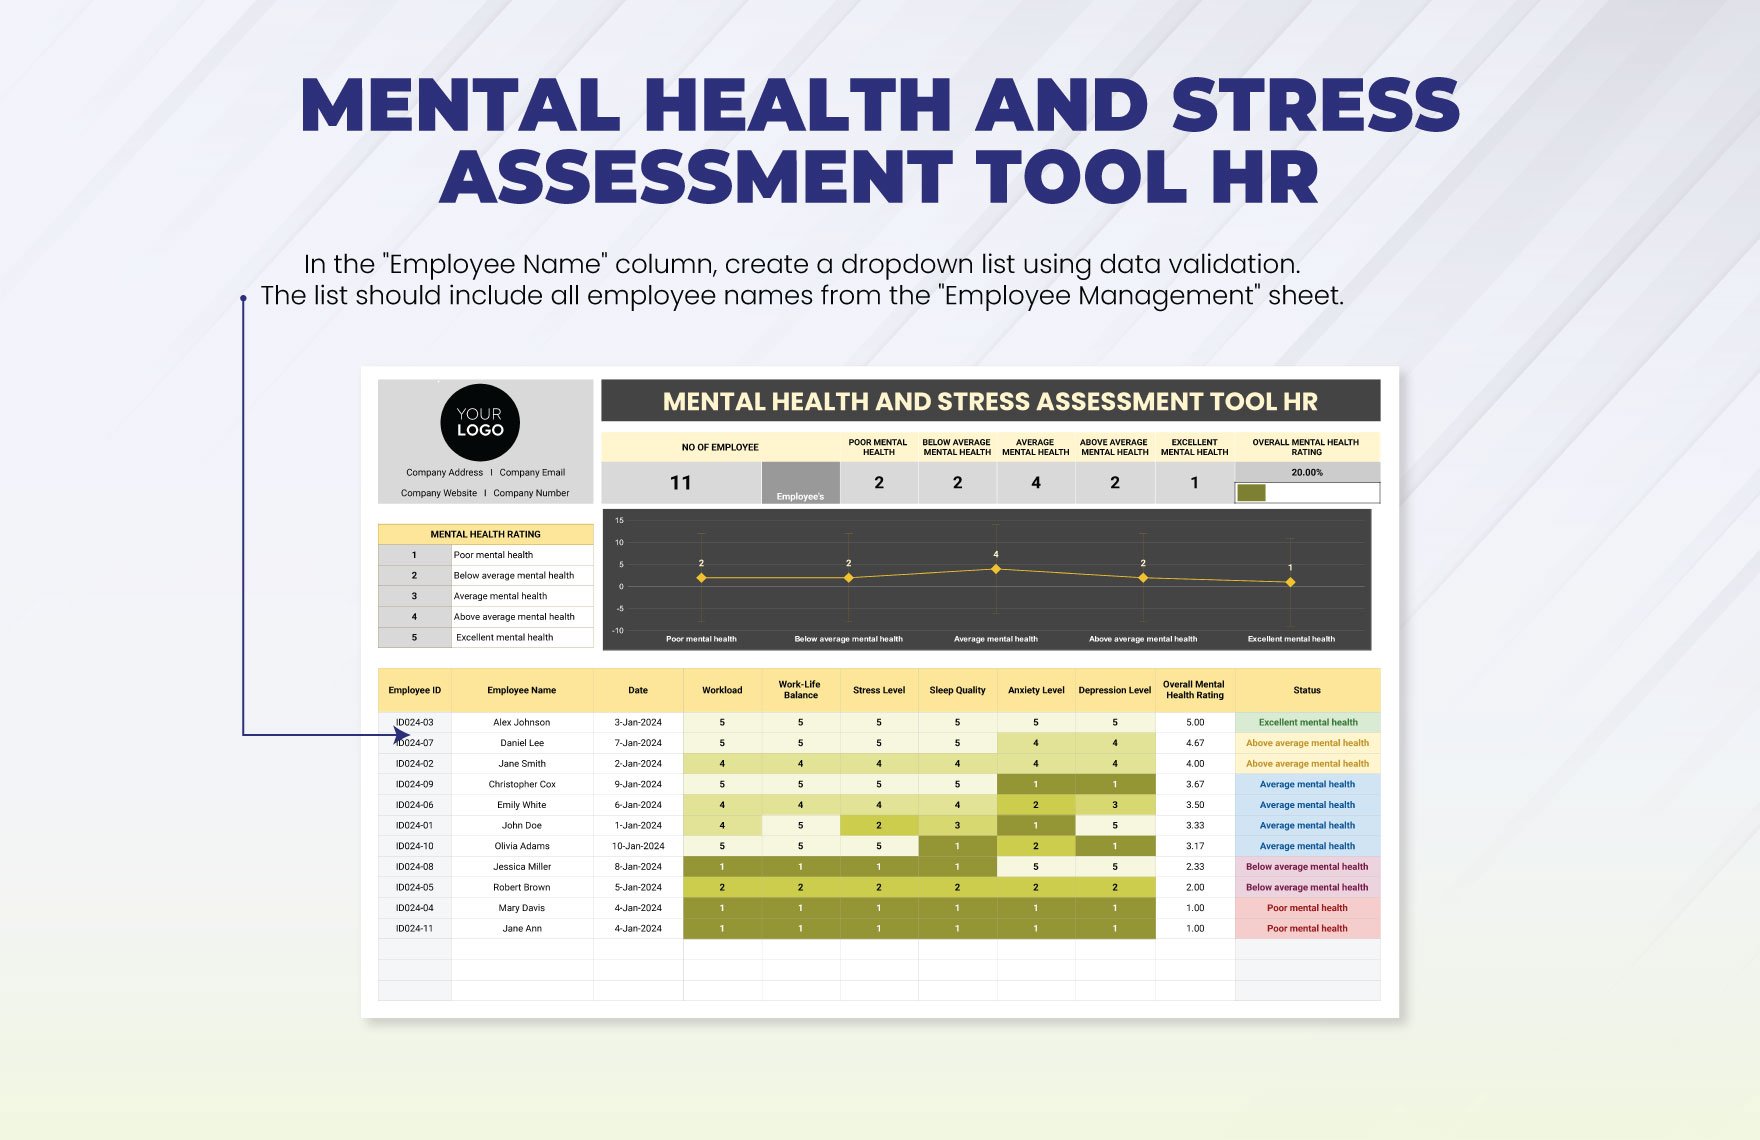 Mental Health and Stress Assessment Tool HR Template